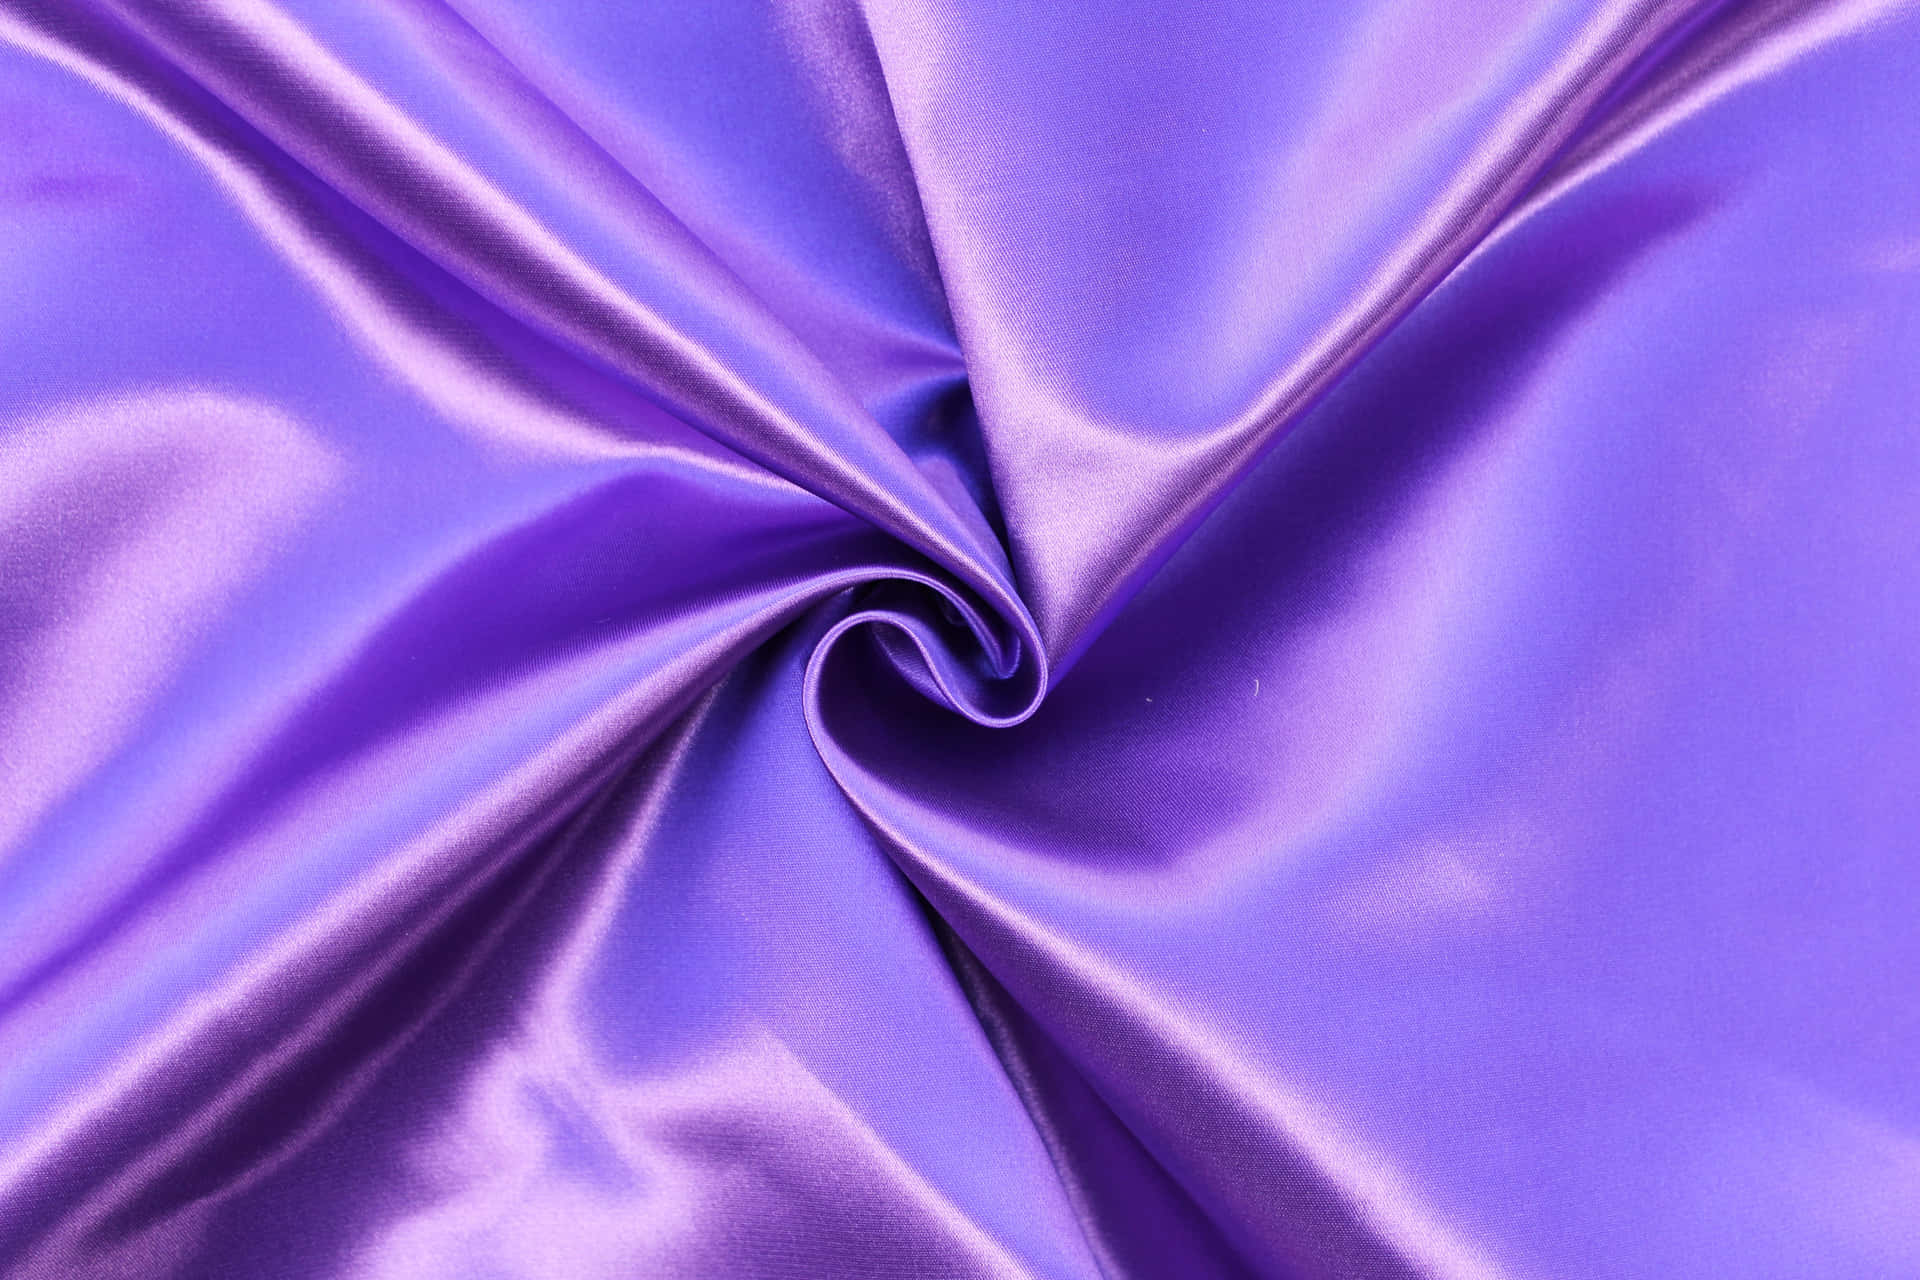 Experience Luxurious Glamor with this Gorgeous Purple Satin Wallpaper Wallpaper